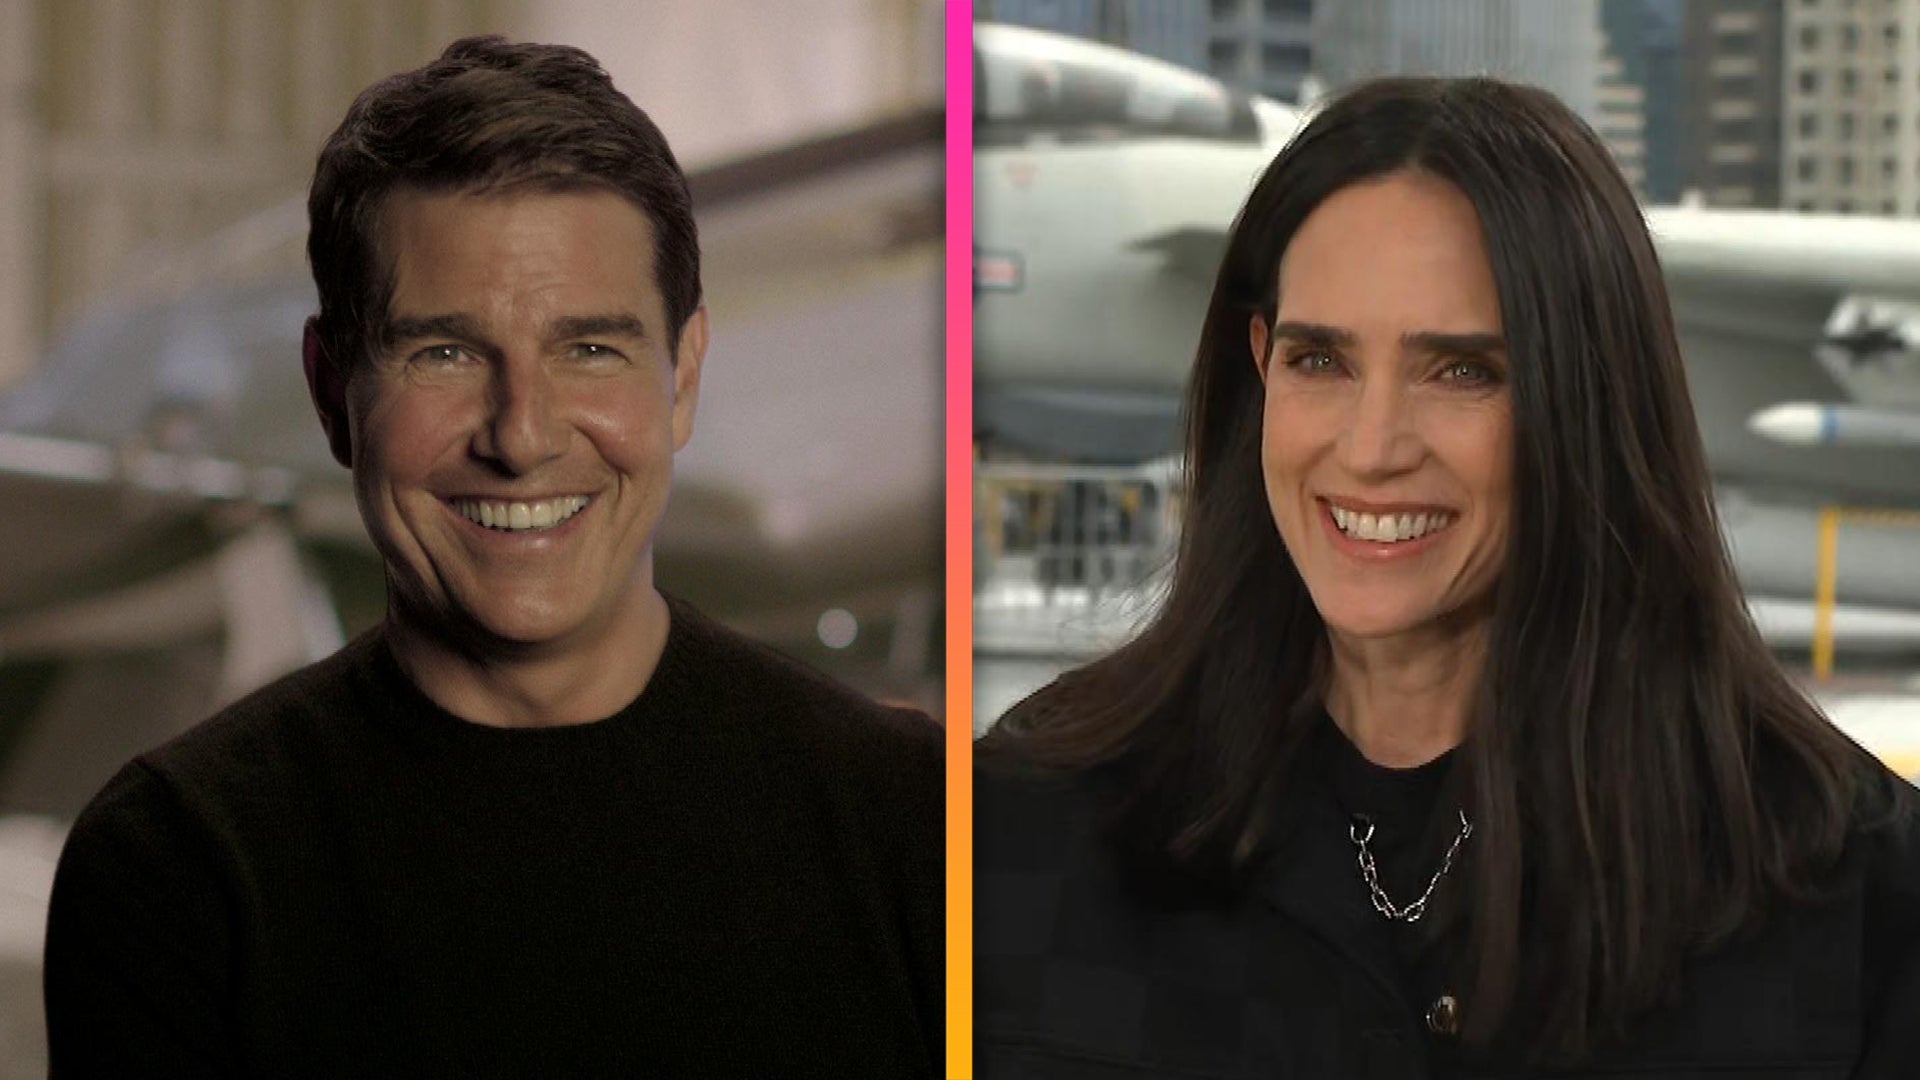 ‘Top Gun: Maverick’: Details Behind Tom Cruise’s New Onscreen Romance With Jennifer Connelly